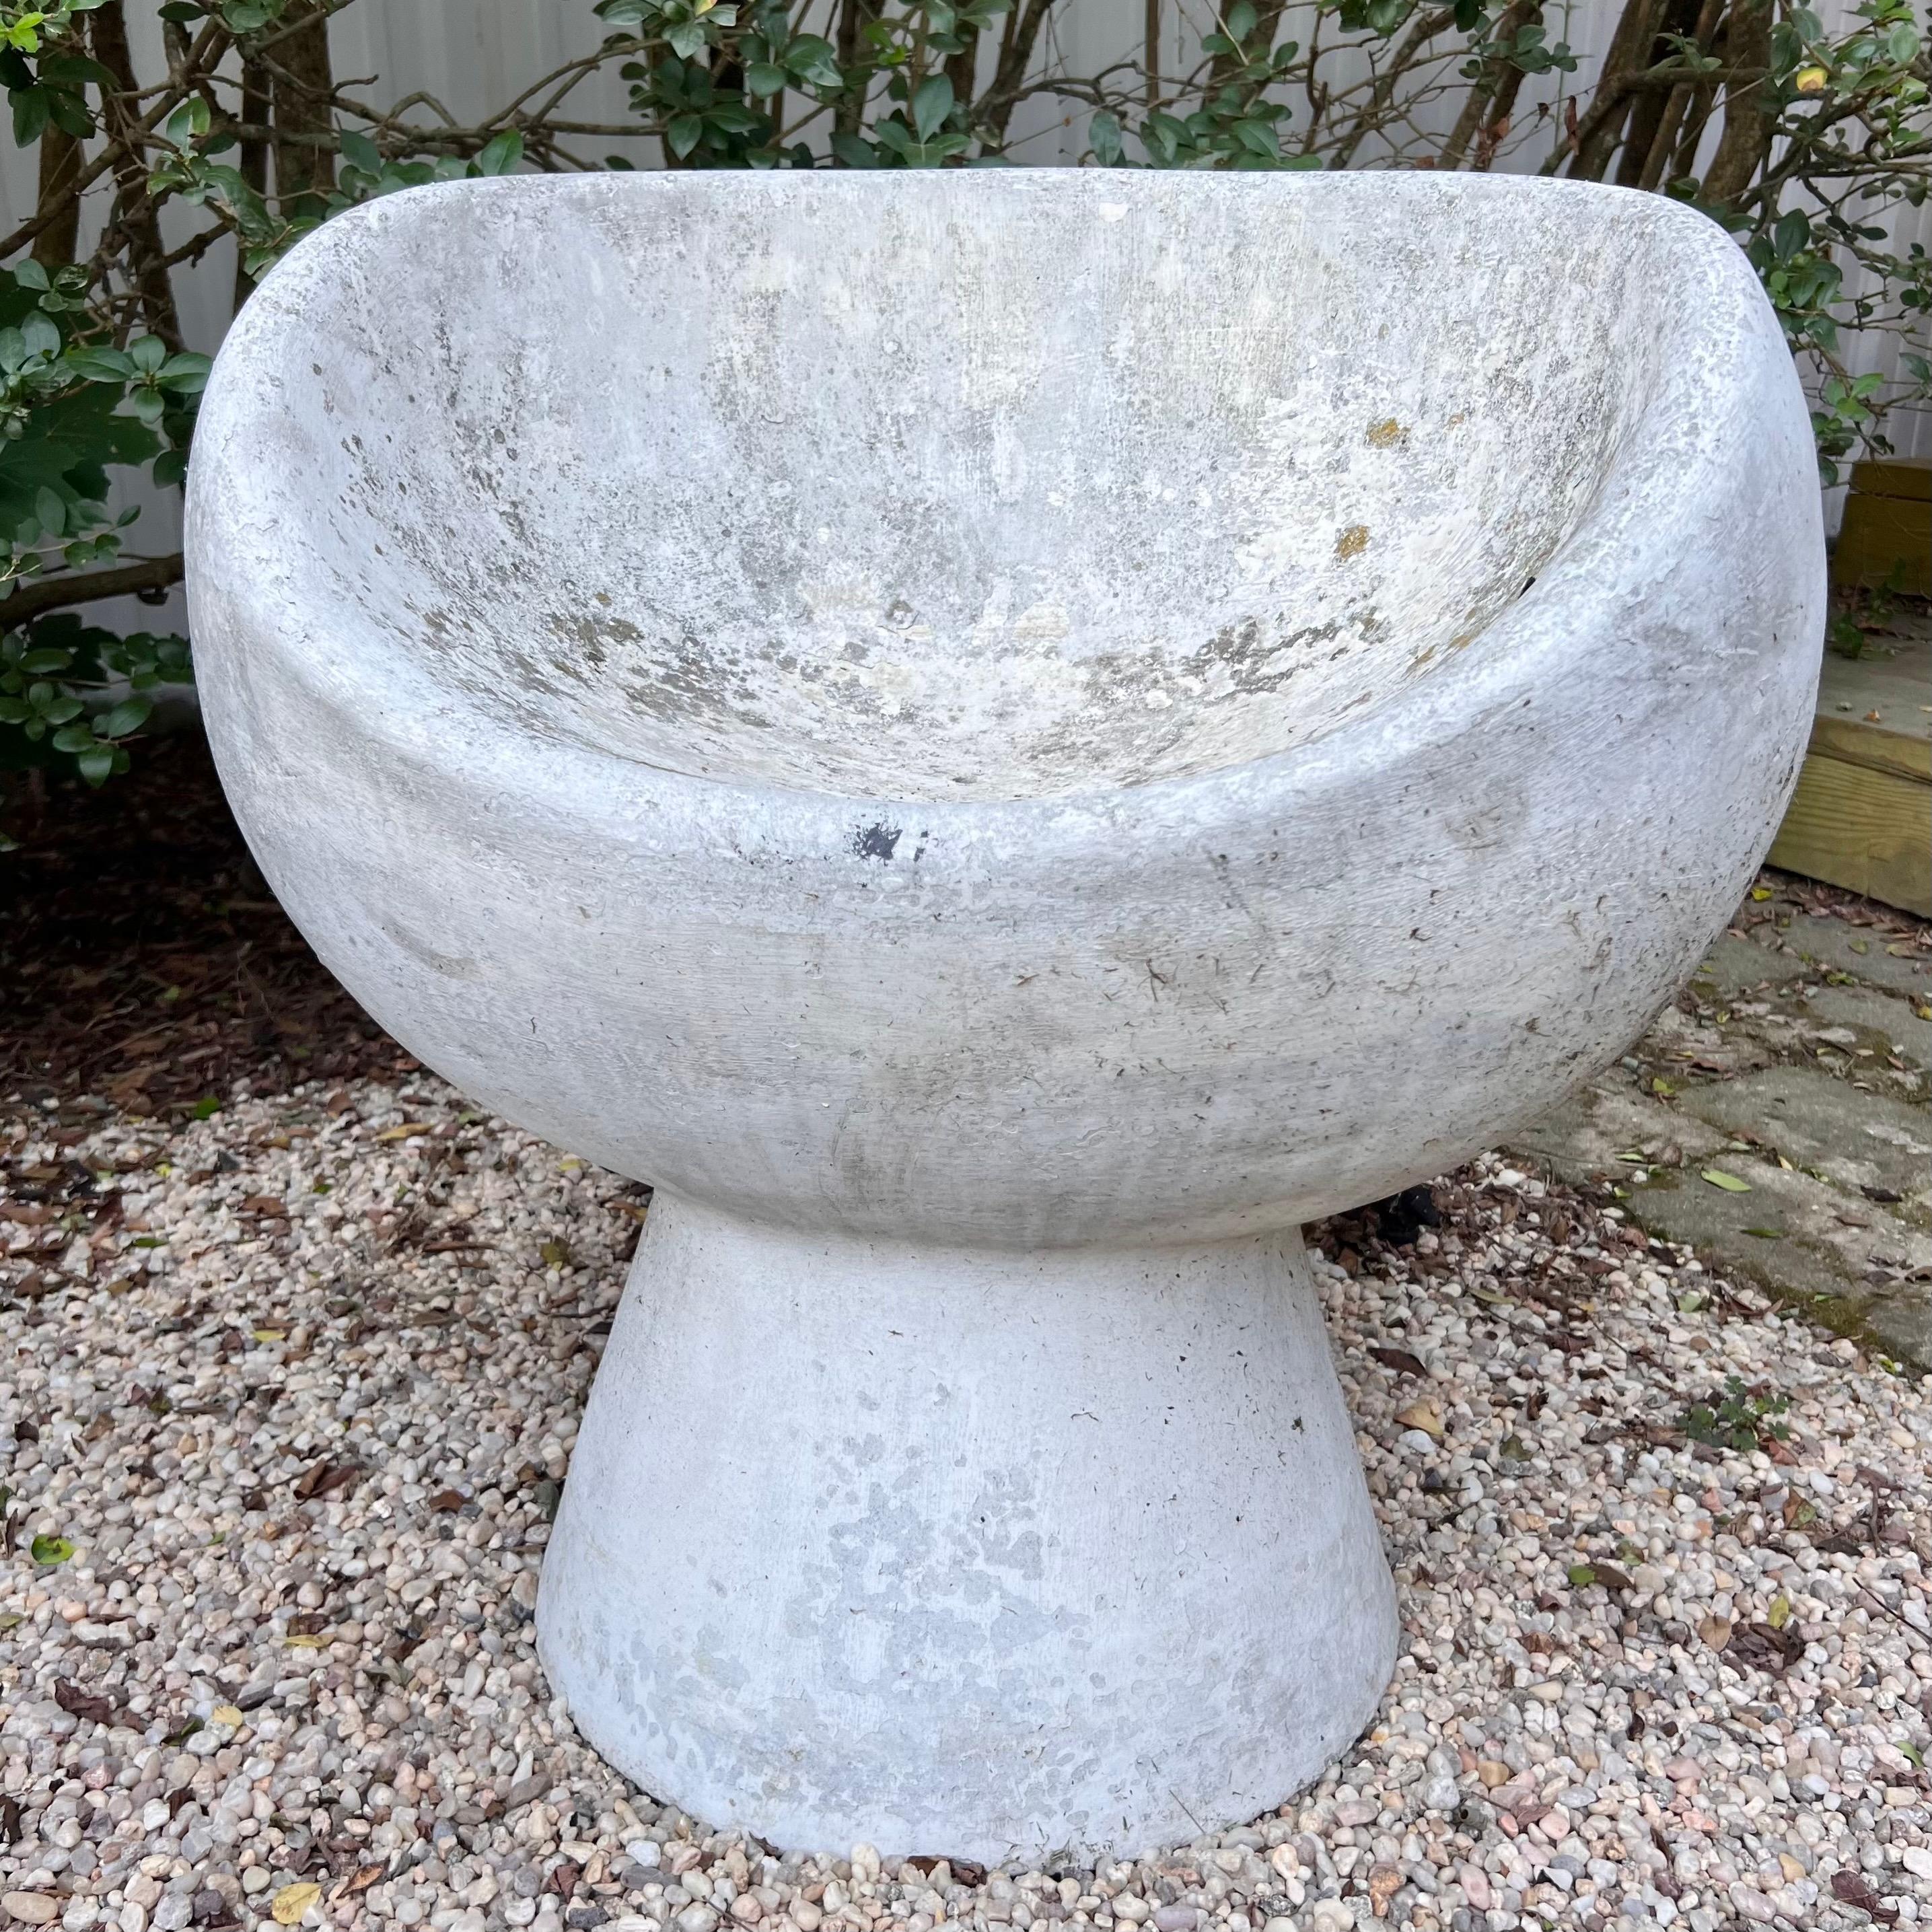 Stunning concrete pod chair designed by Swiss Architect Willy Guhl. Hand made in Switzerland by Eternit in the 1960s. Gorgeous patina. Factory drilled hole in seat for water to drain. Great sculptural piece. Perfect for indoors or outside. Great